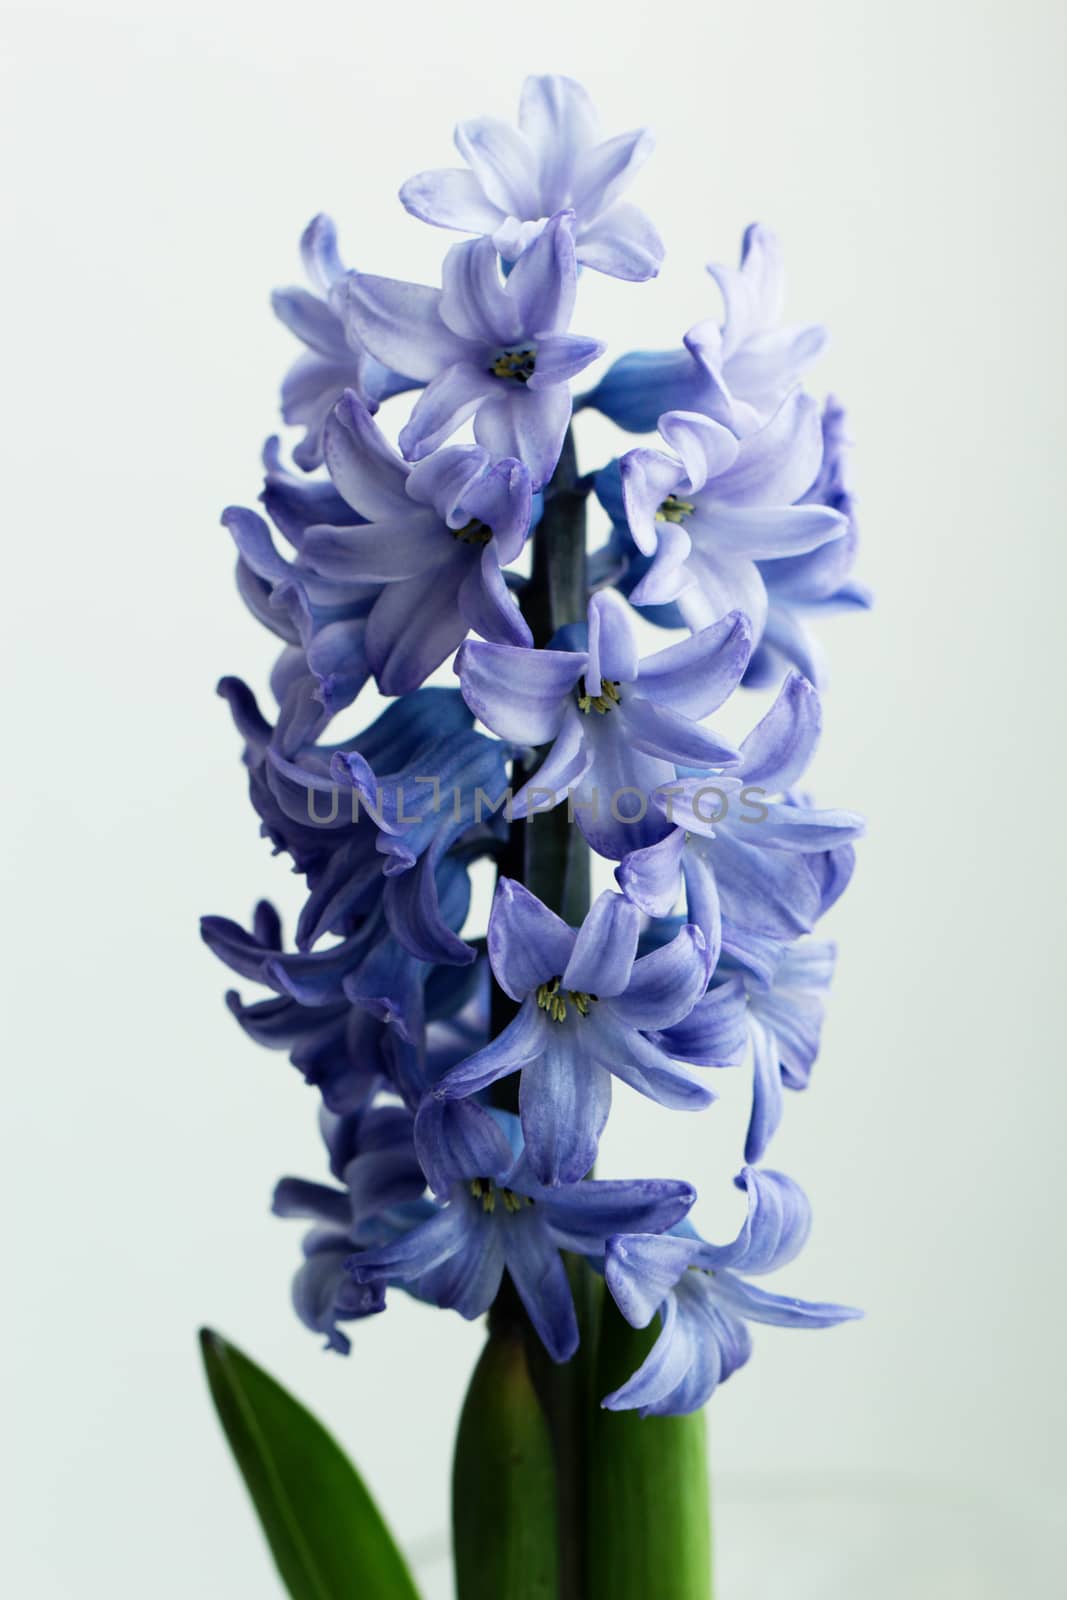 hyacinth flowers in glass vase by kate_ovcharenko